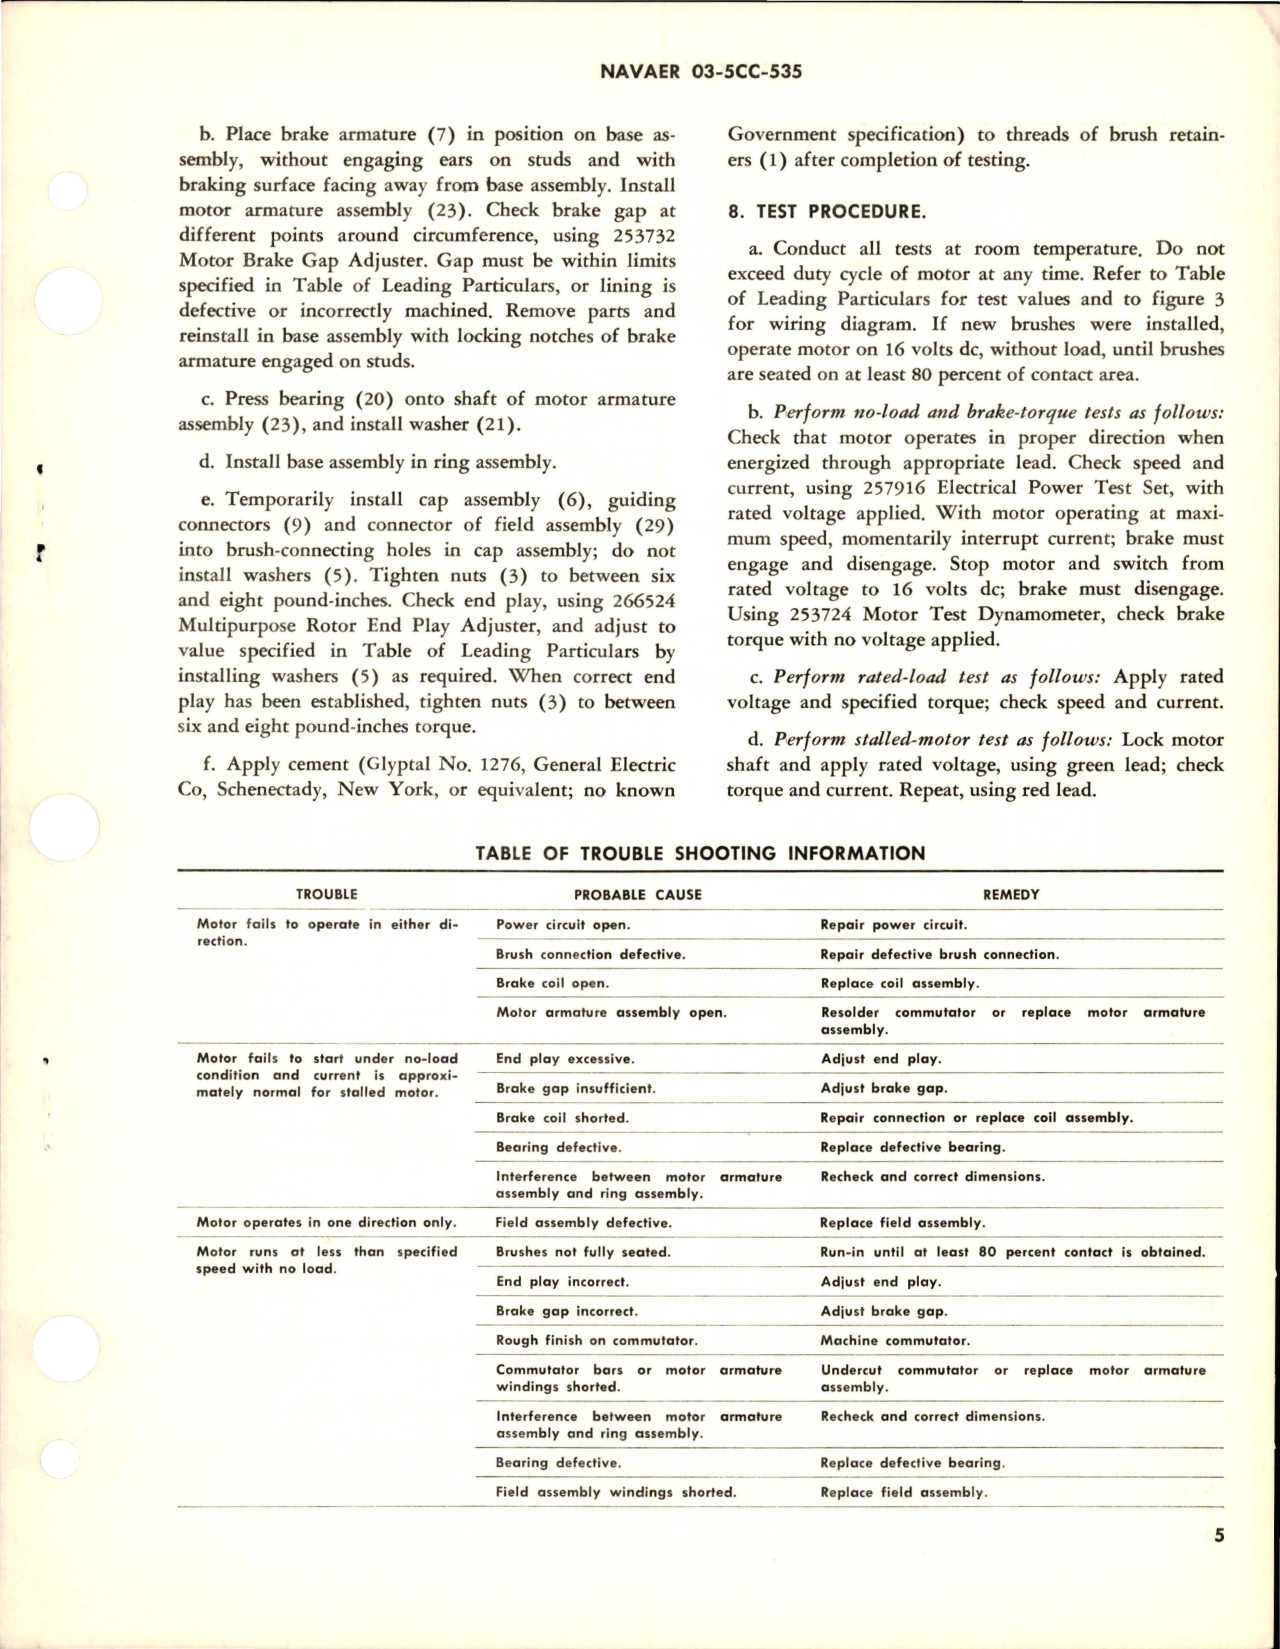 Sample page 5 from AirCorps Library document: Overhaul Instructions with Parts Breakdown for Direct Current Motor - Parts 32741 and 32741-1